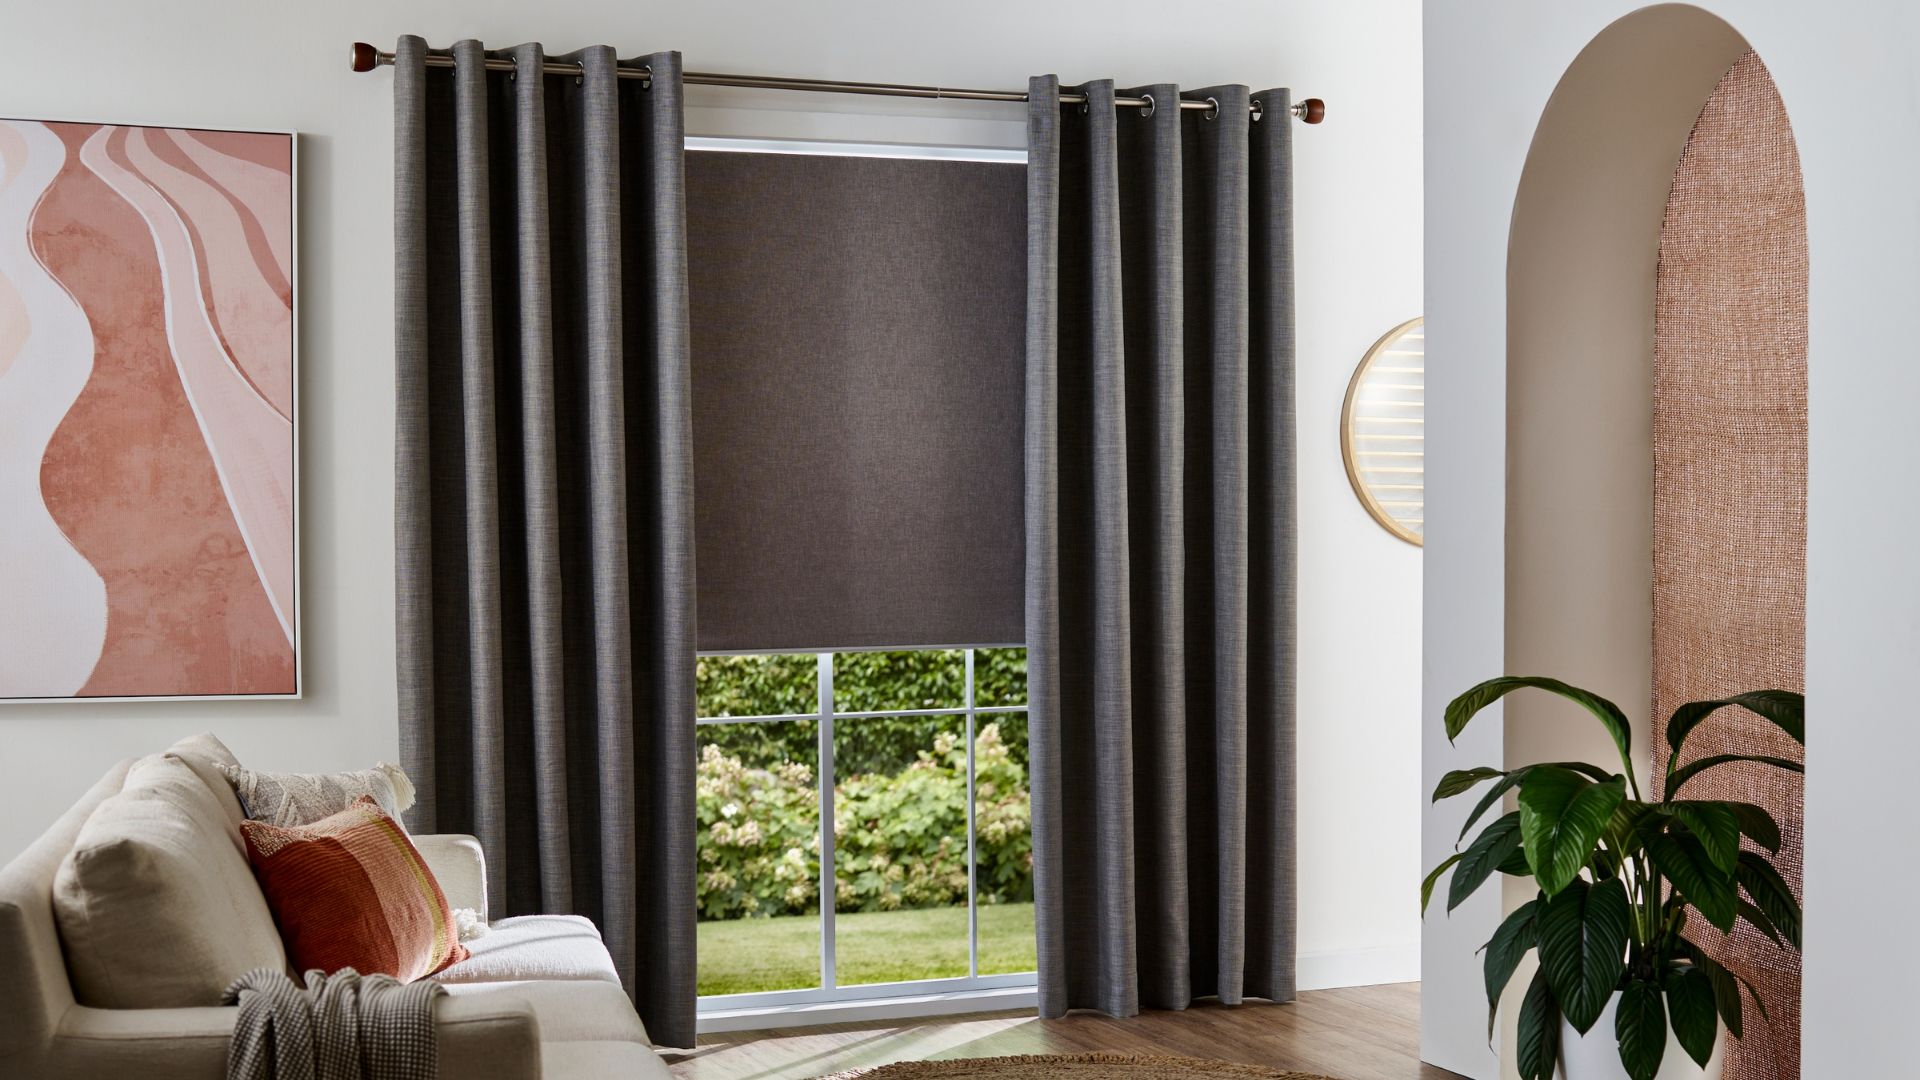 Matching warm grey roller blinds and curtains